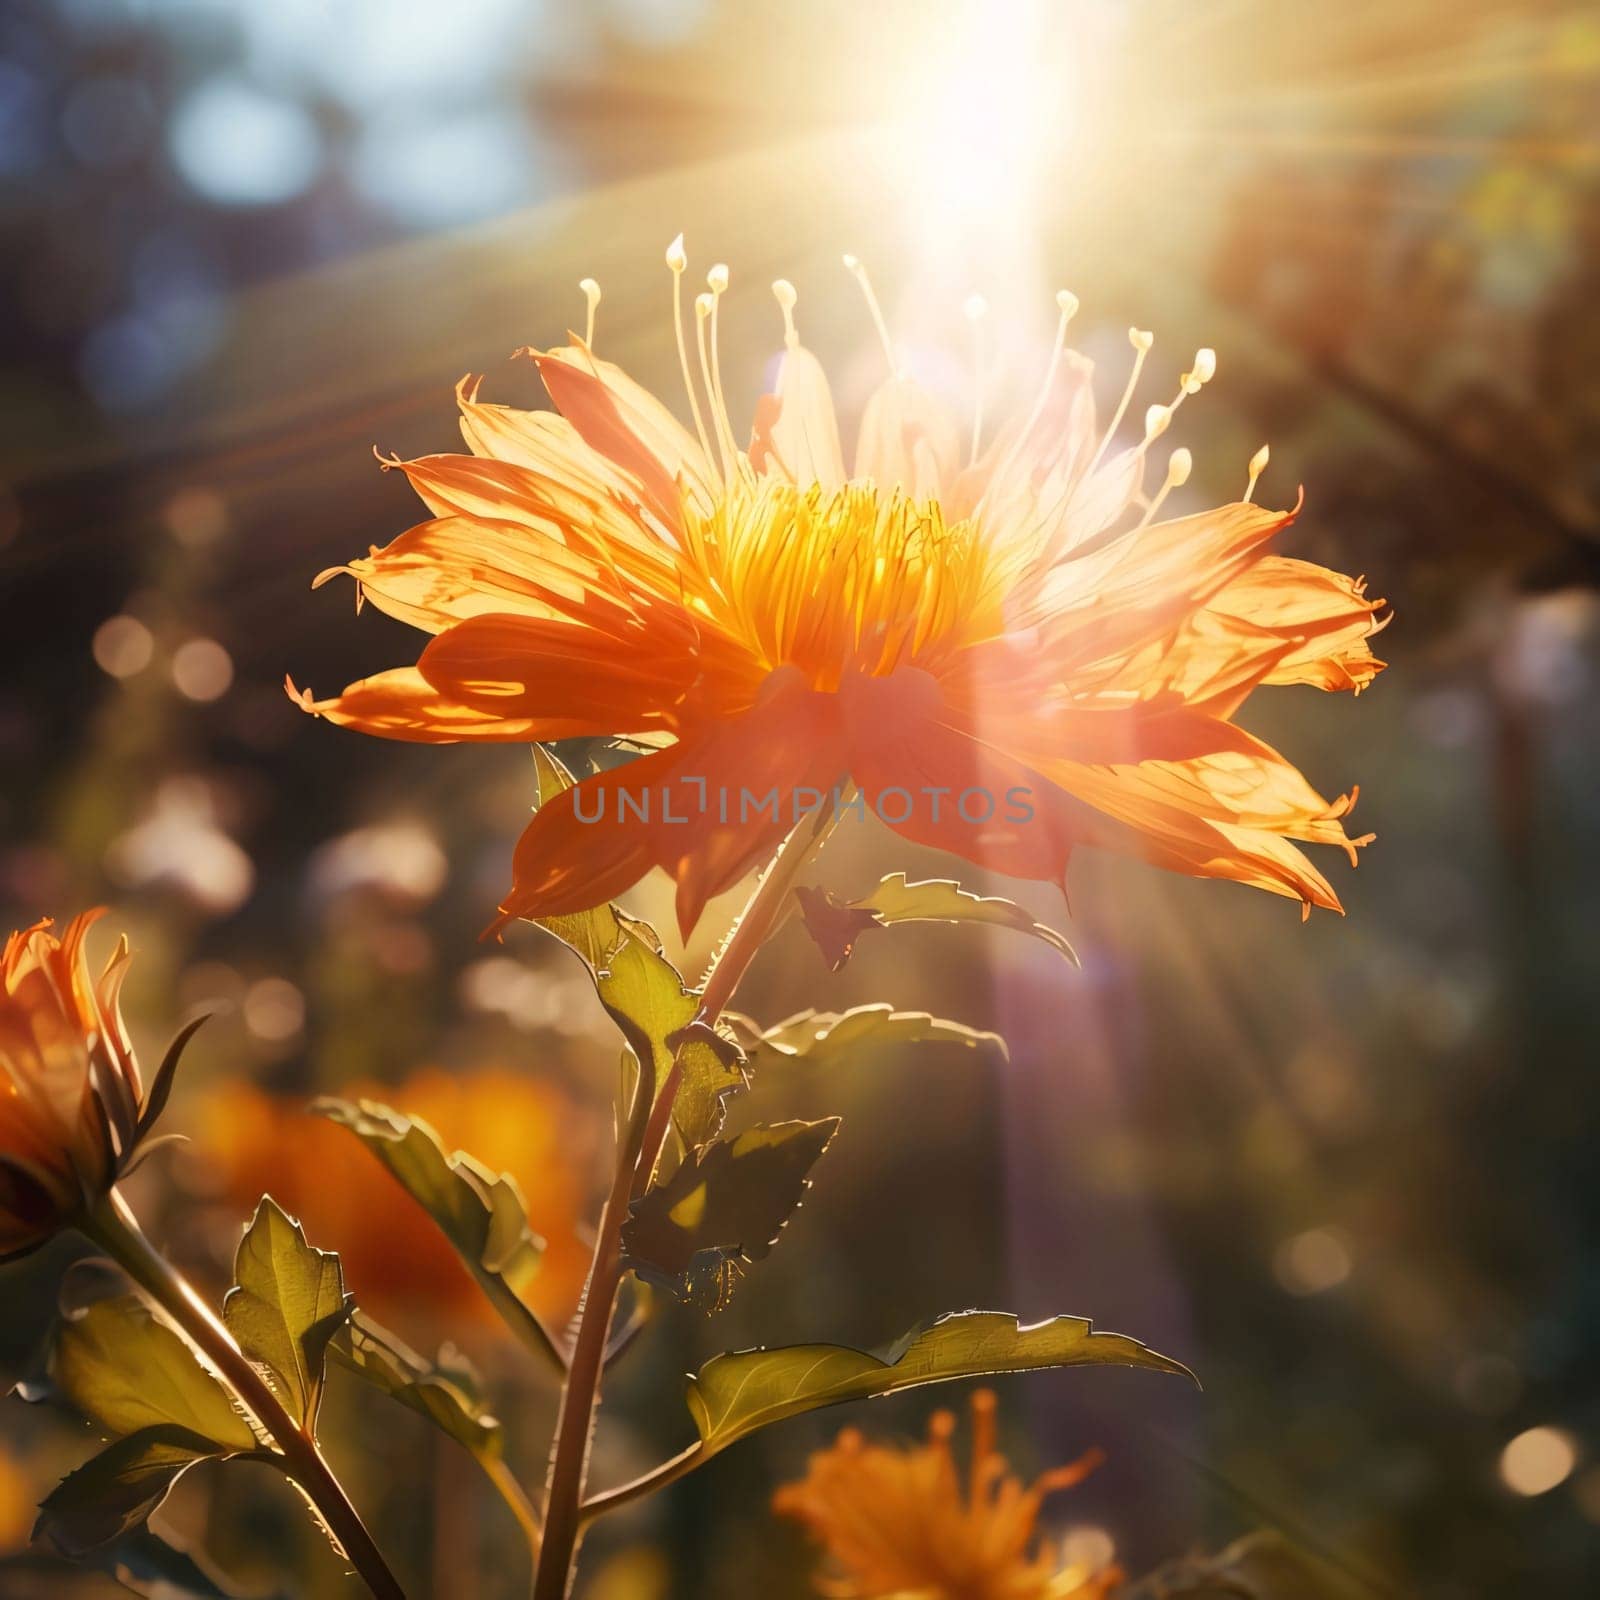 Sun rays falling on orange flower, Blurred green background. Flowering flowers, a symbol of spring, new life. A joyful time of nature waking up to life.